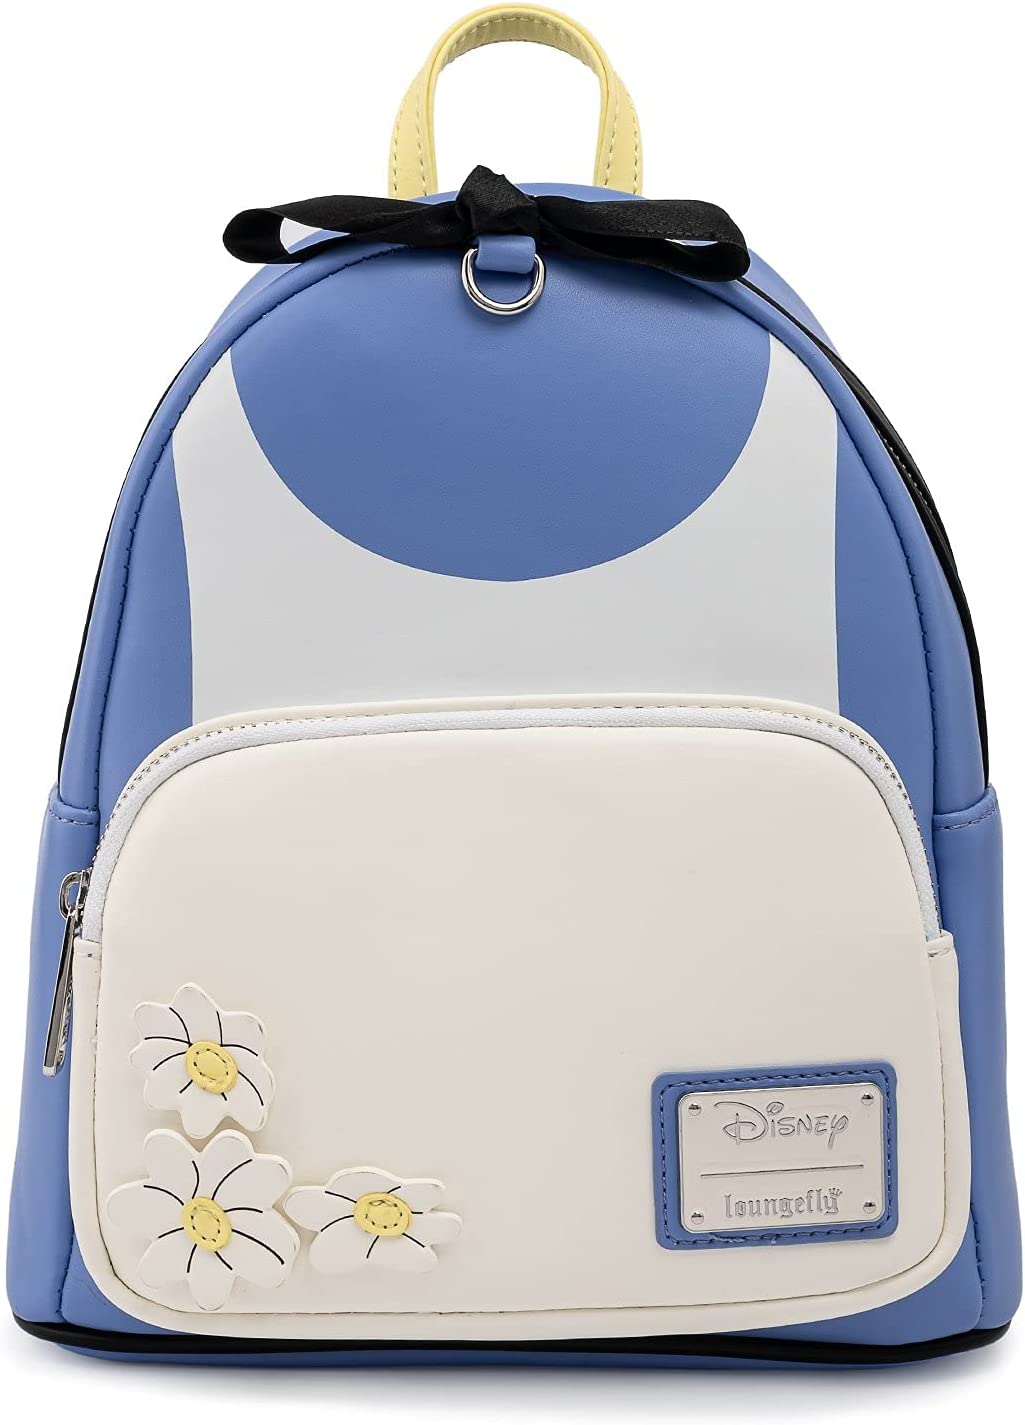 Loungefly Disney Alice in Wonderland Cosplay Mini Backpack Bag with Detachable Wristlet